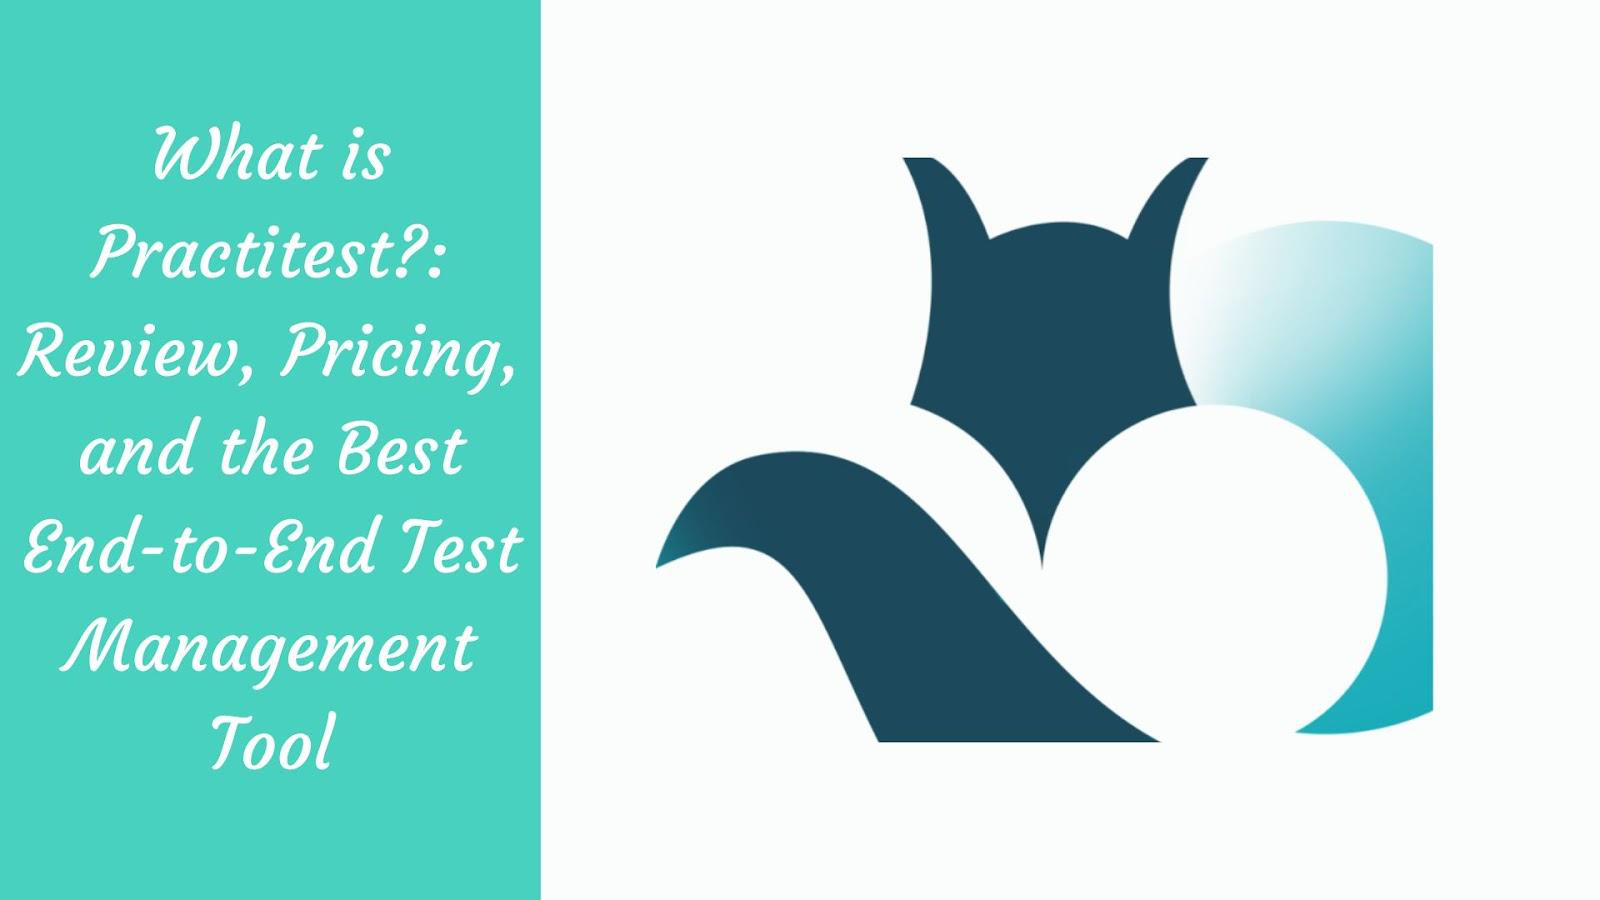 What is Practitest: Review, Pricing, and the Best End-to-End Test Management Tool